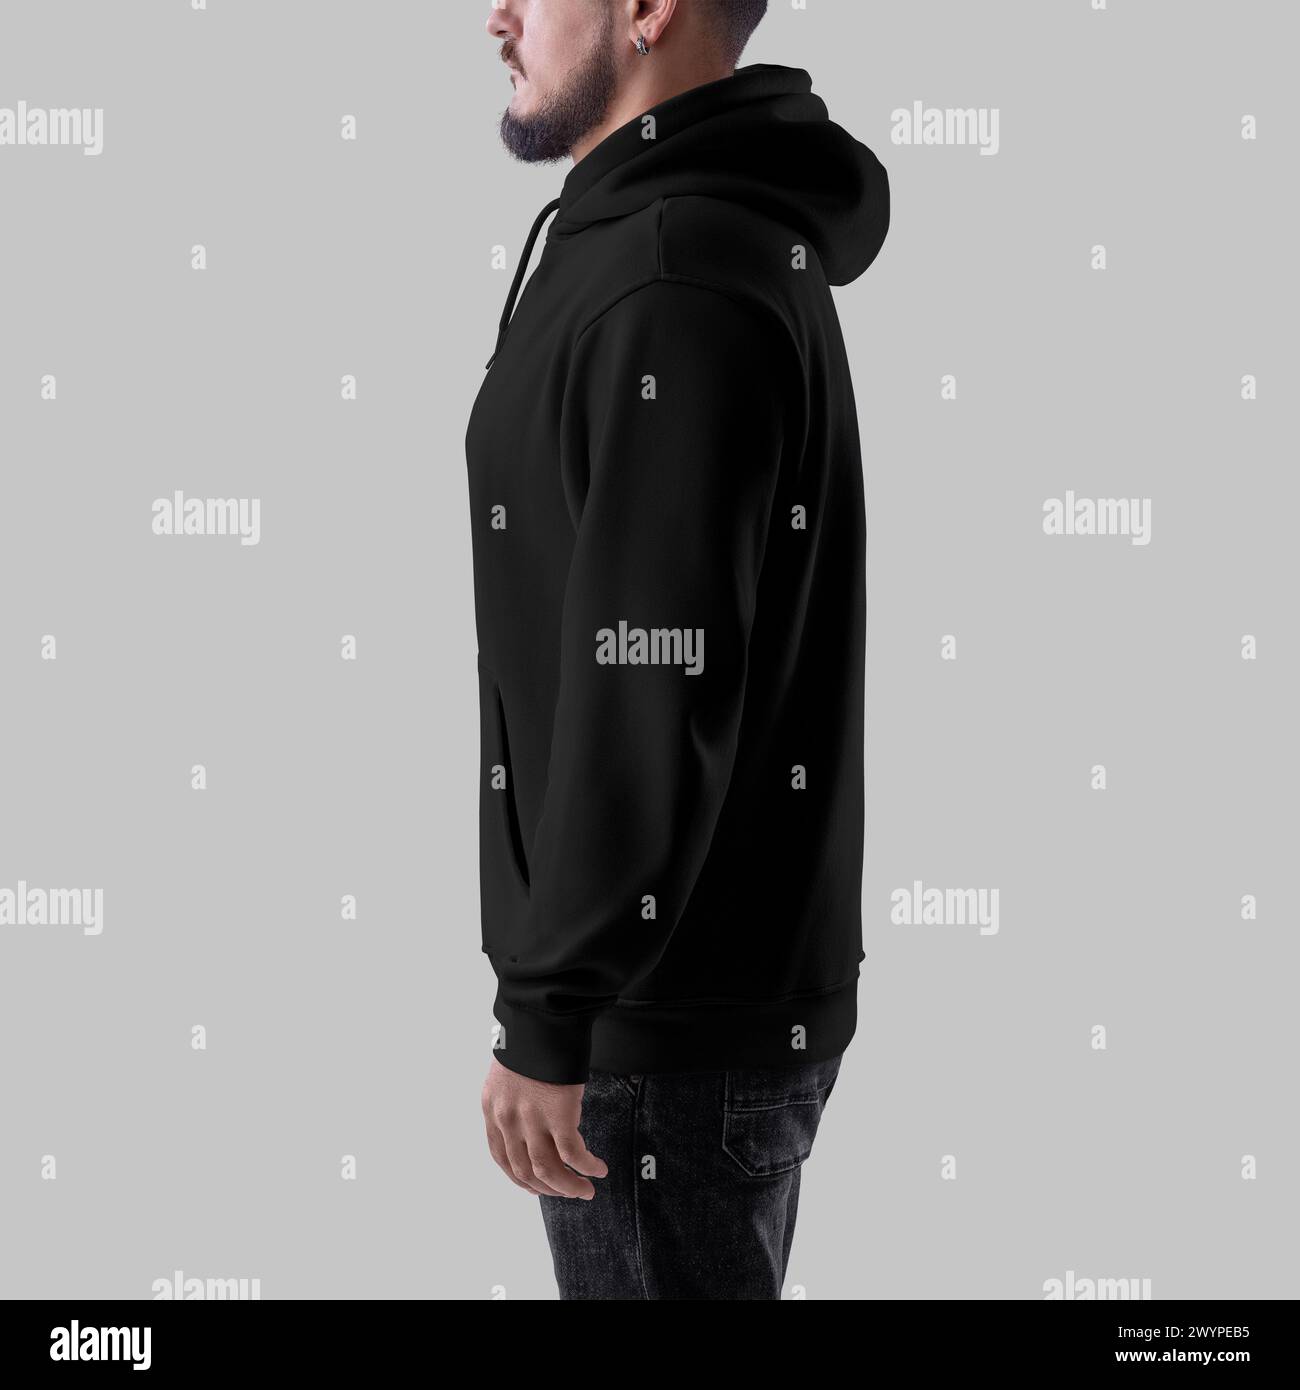 Template of black oversized hoodie on bearded man, side view, clothing with pocket, cuff, strings, isolated on background. Mockup of fashionable male Stock Photo